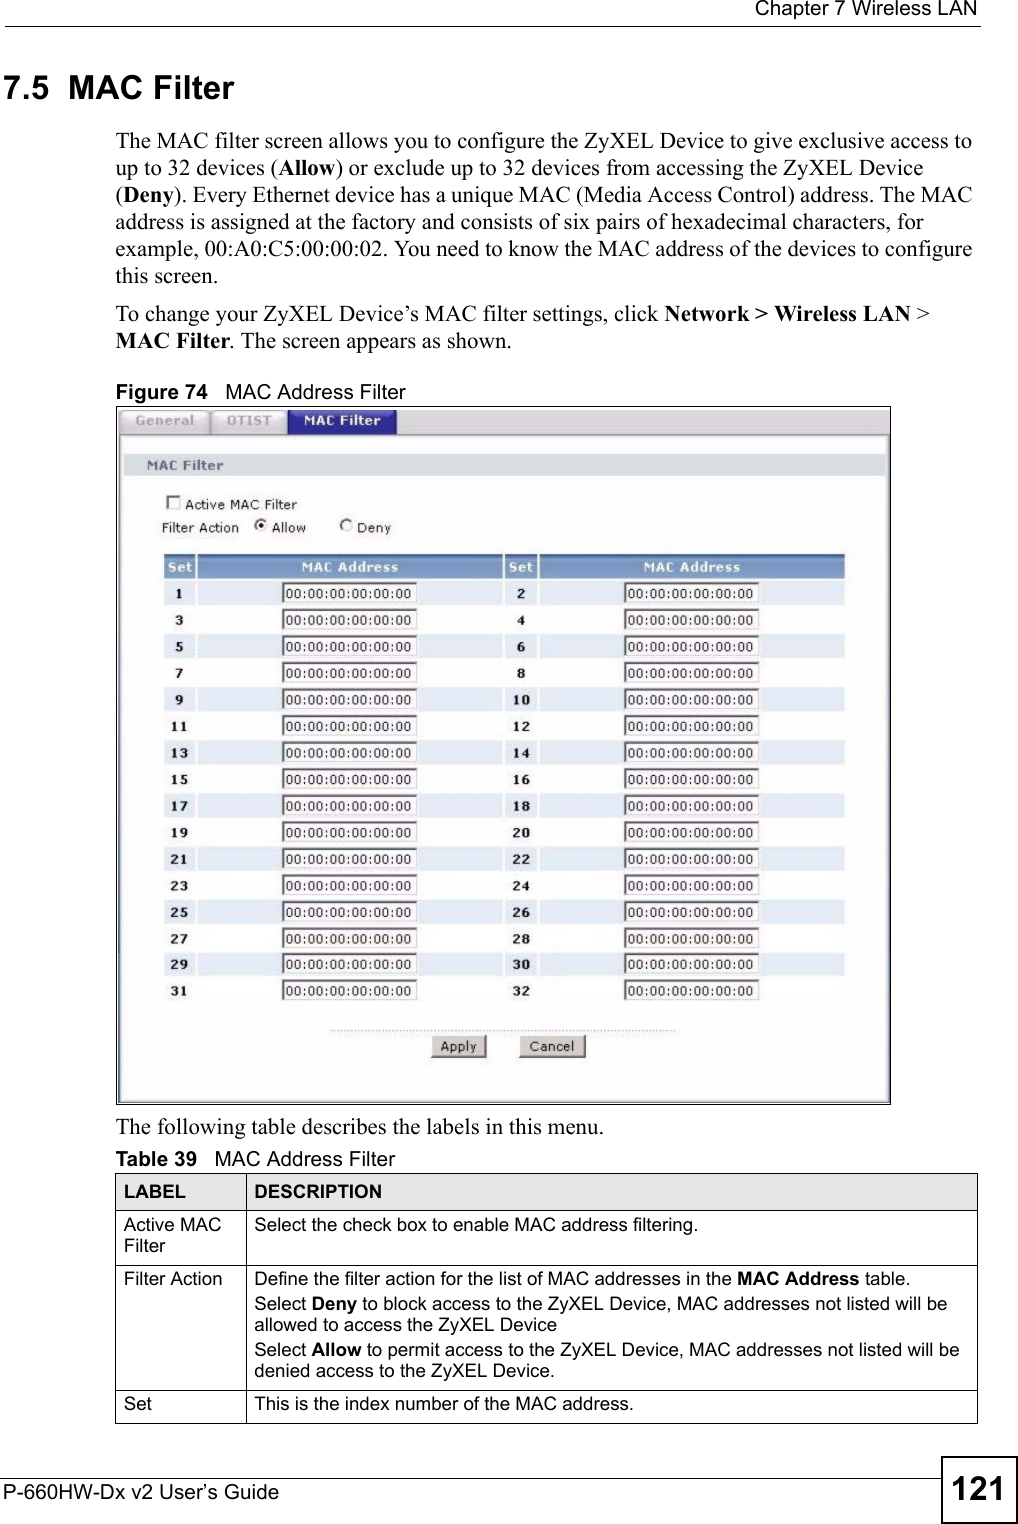  Chapter 7 Wireless LANP-660HW-Dx v2 User’s Guide 1217.5  MAC Filter     The MAC filter screen allows you to configure the ZyXEL Device to give exclusive access to up to 32 devices (Allow) or exclude up to 32 devices from accessing the ZyXEL Device (Deny). Every Ethernet device has a unique MAC (Media Access Control) address. The MAC address is assigned at the factory and consists of six pairs of hexadecimal characters, for example, 00:A0:C5:00:00:02. You need to know the MAC address of the devices to configure this screen.To change your ZyXEL Device’s MAC filter settings, click Network &gt; Wireless LAN &gt; MAC Filter. The screen appears as shown.Figure 74   MAC Address FilterThe following table describes the labels in this menu.Table 39   MAC Address FilterLABEL DESCRIPTIONActive MAC FilterSelect the check box to enable MAC address filtering.Filter Action  Define the filter action for the list of MAC addresses in the MAC Address table. Select Deny to block access to the ZyXEL Device, MAC addresses not listed will be allowed to access the ZyXEL Device Select Allow to permit access to the ZyXEL Device, MAC addresses not listed will be denied access to the ZyXEL Device. Set This is the index number of the MAC address.